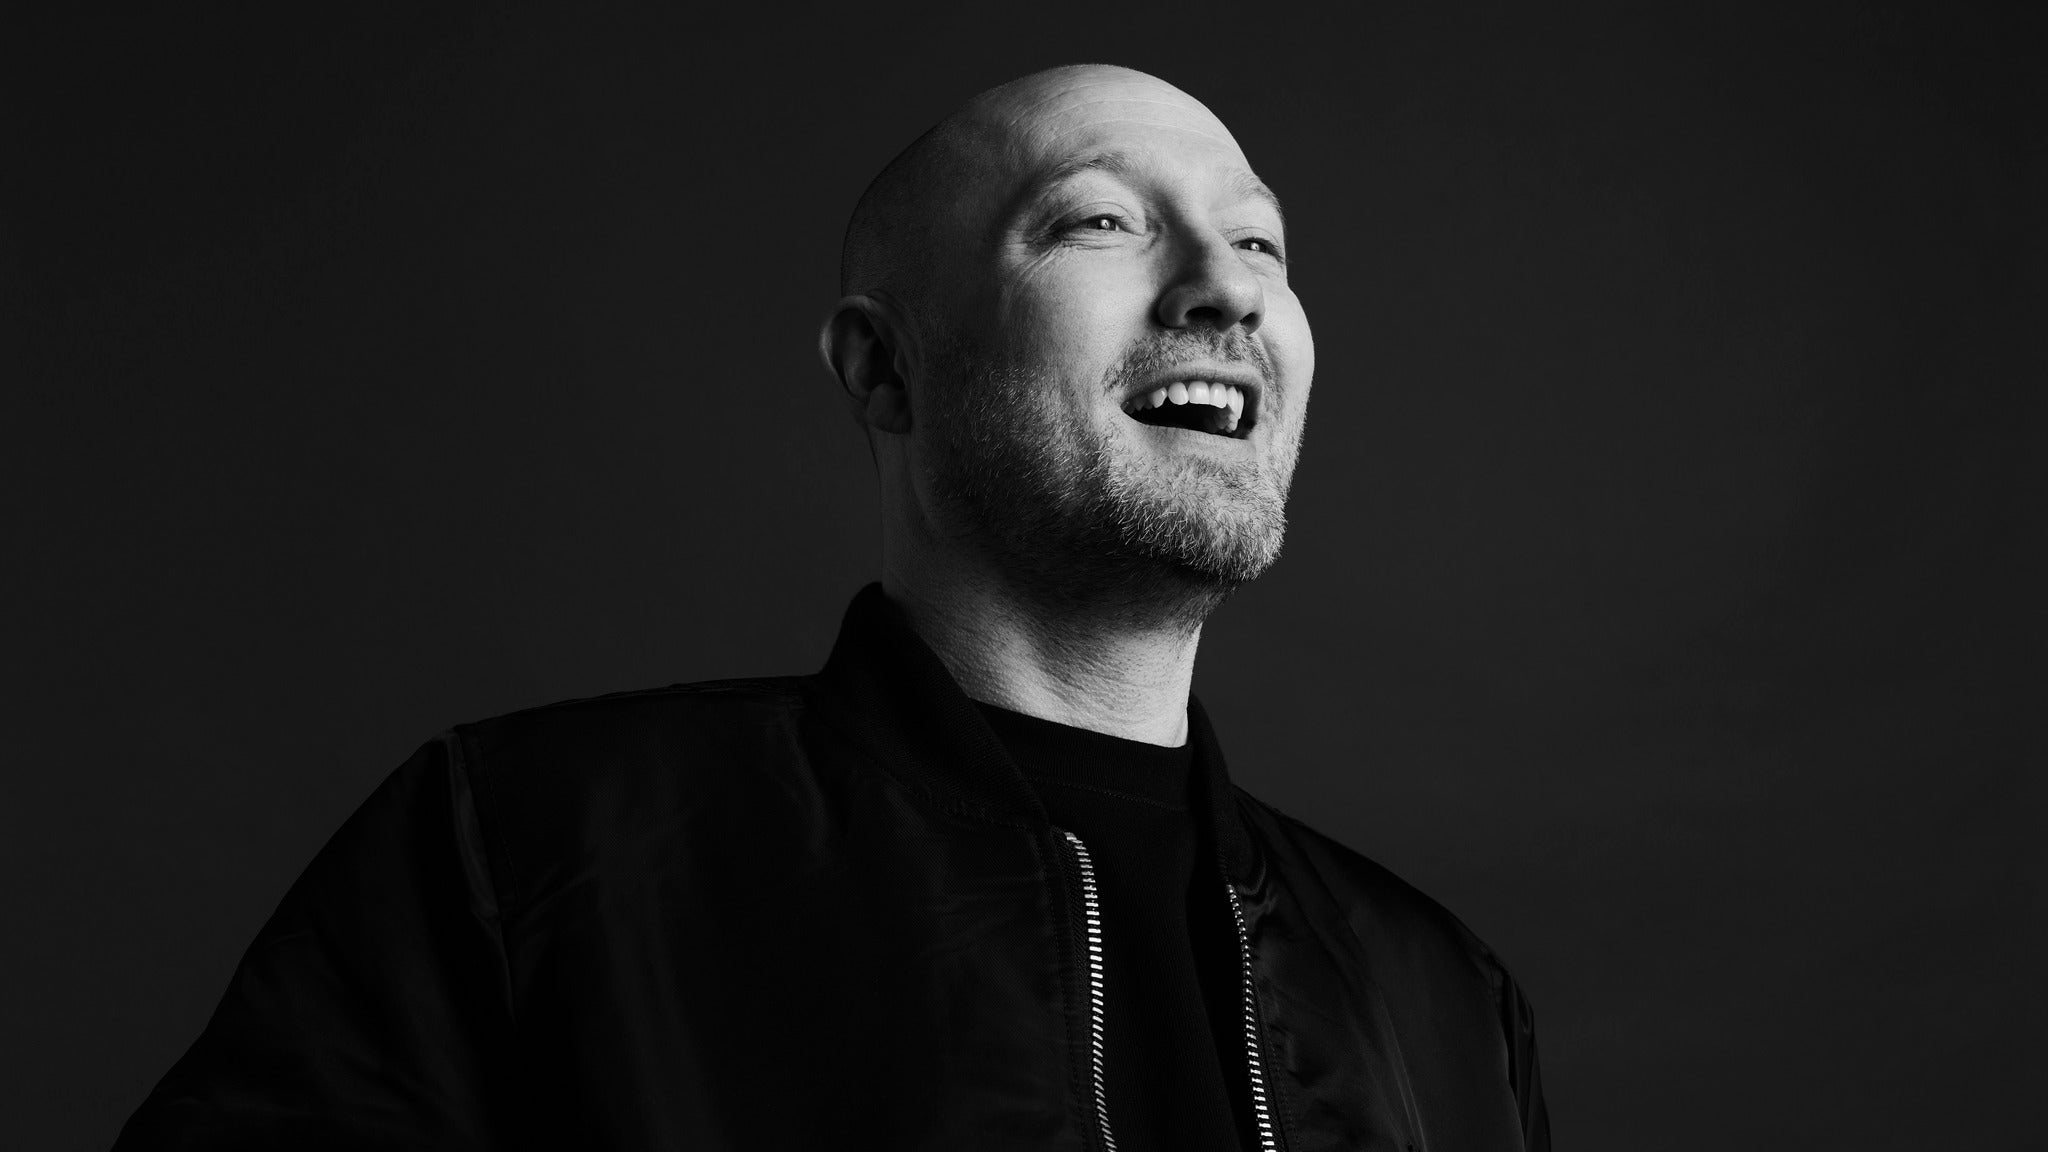 Paul Kalkbrenner - North America Tour 2022 presale code for early tickets in Denver